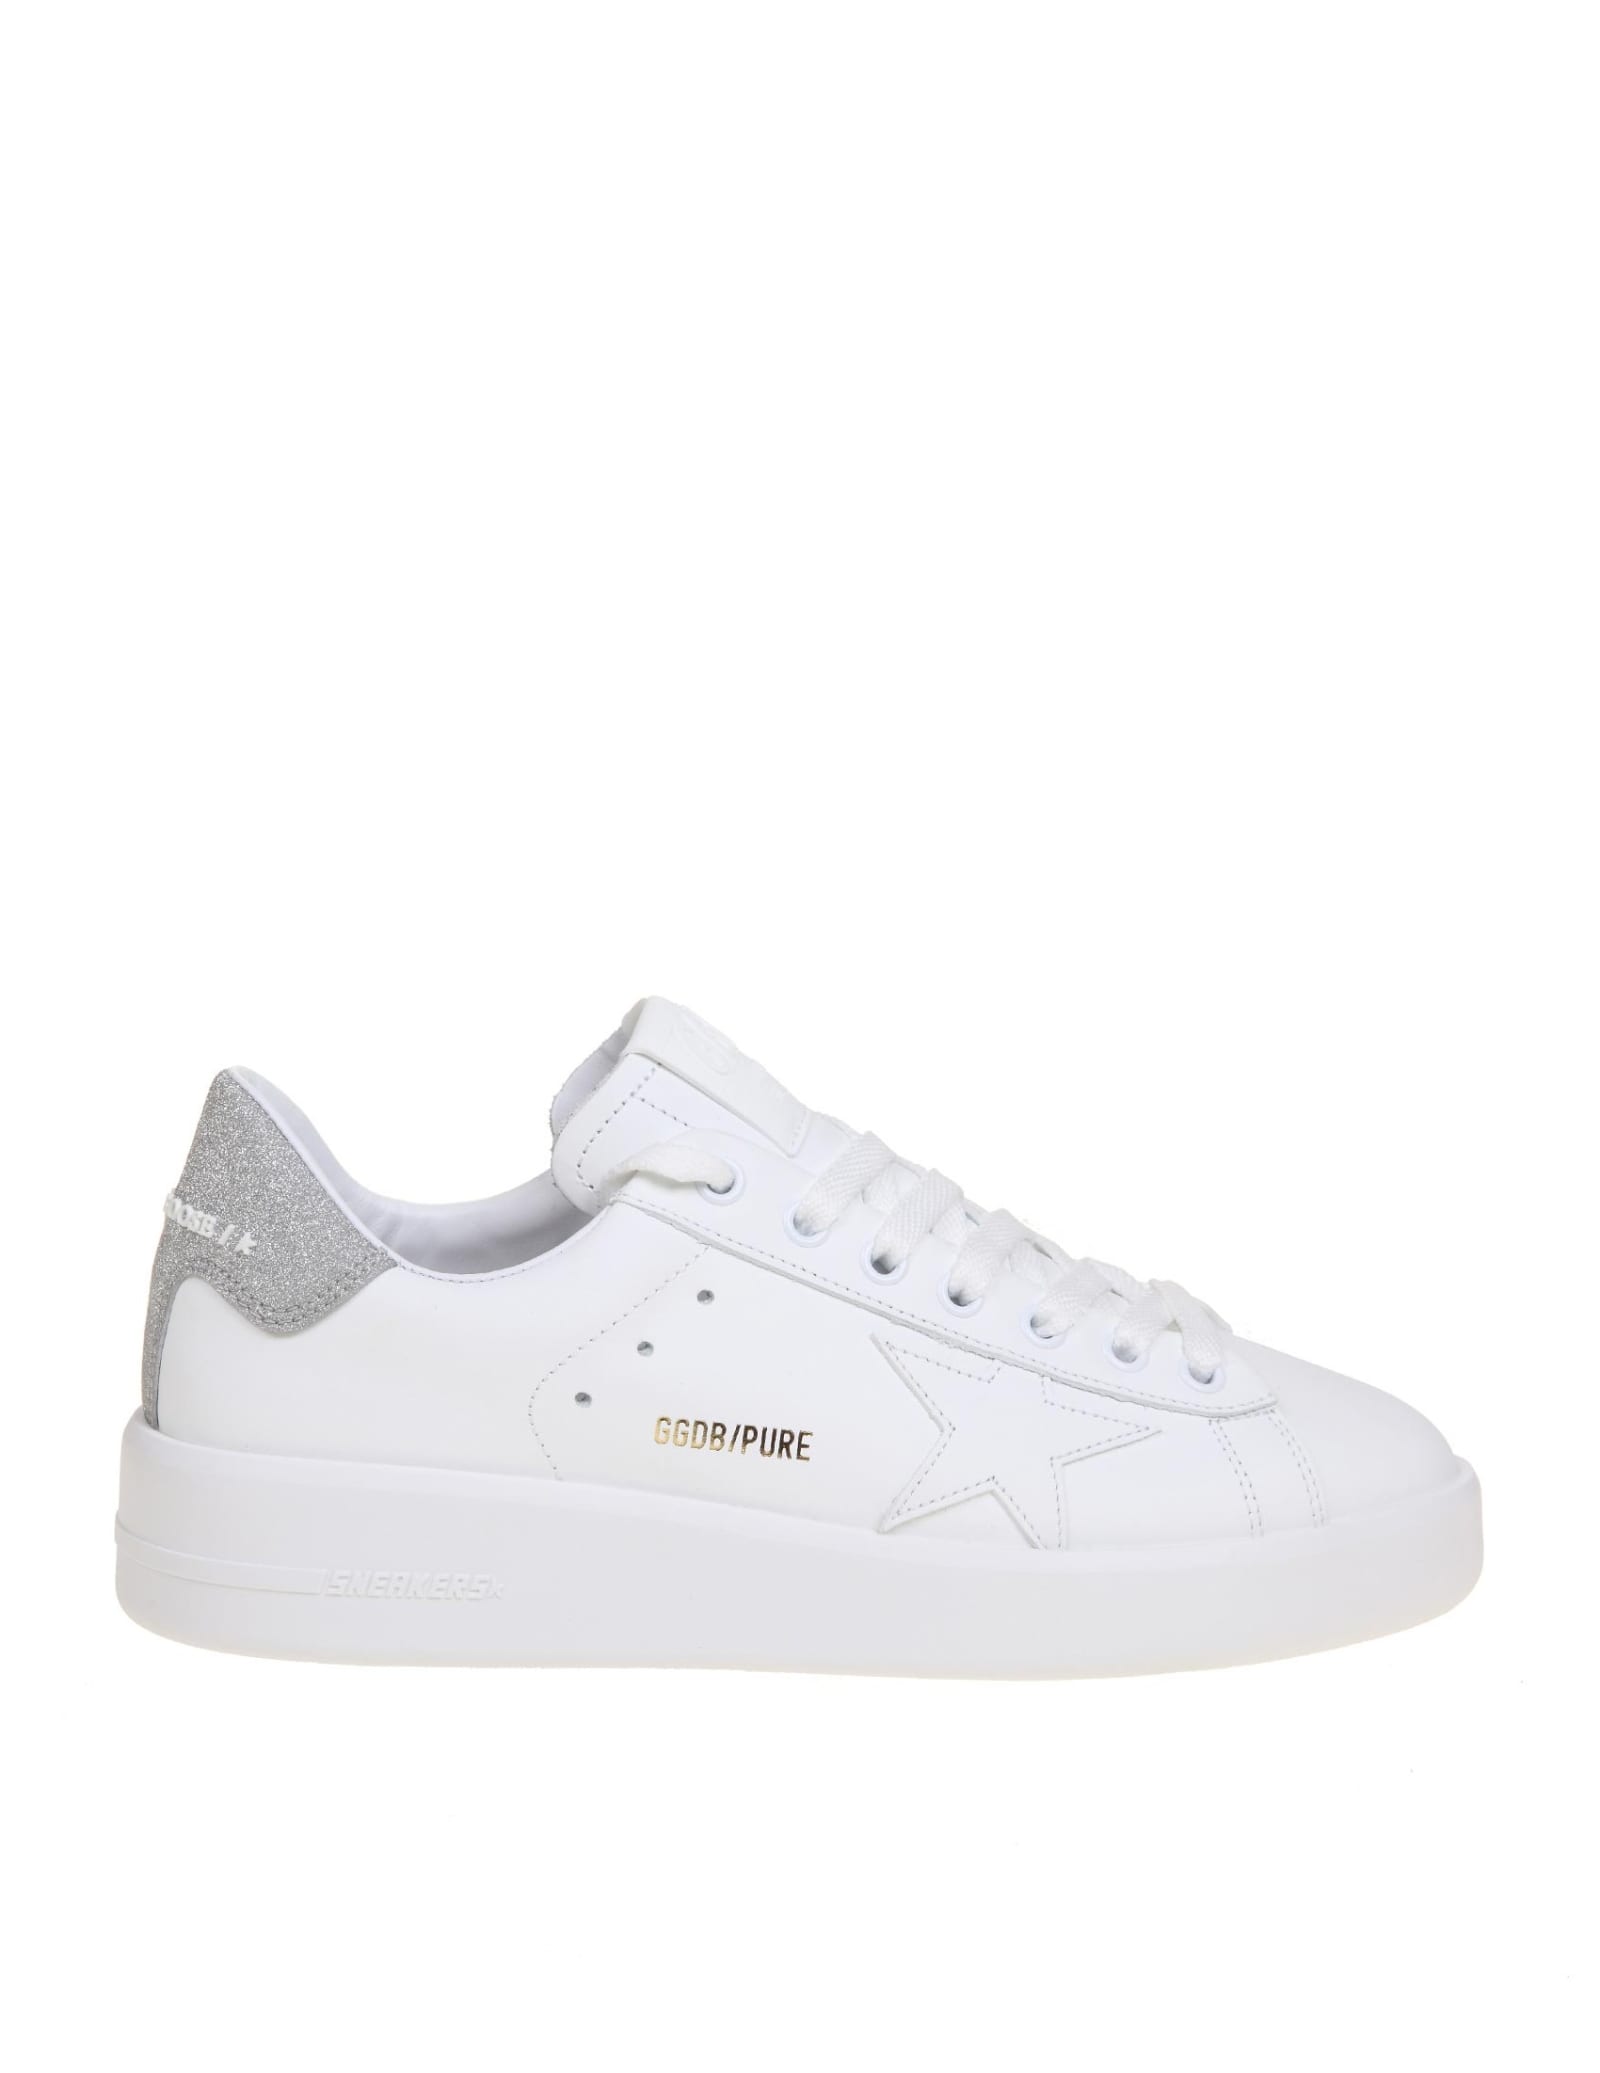 Buy Golden Goose Pure Star Sneakers In White Leather online, shop Golden Goose shoes with free shipping